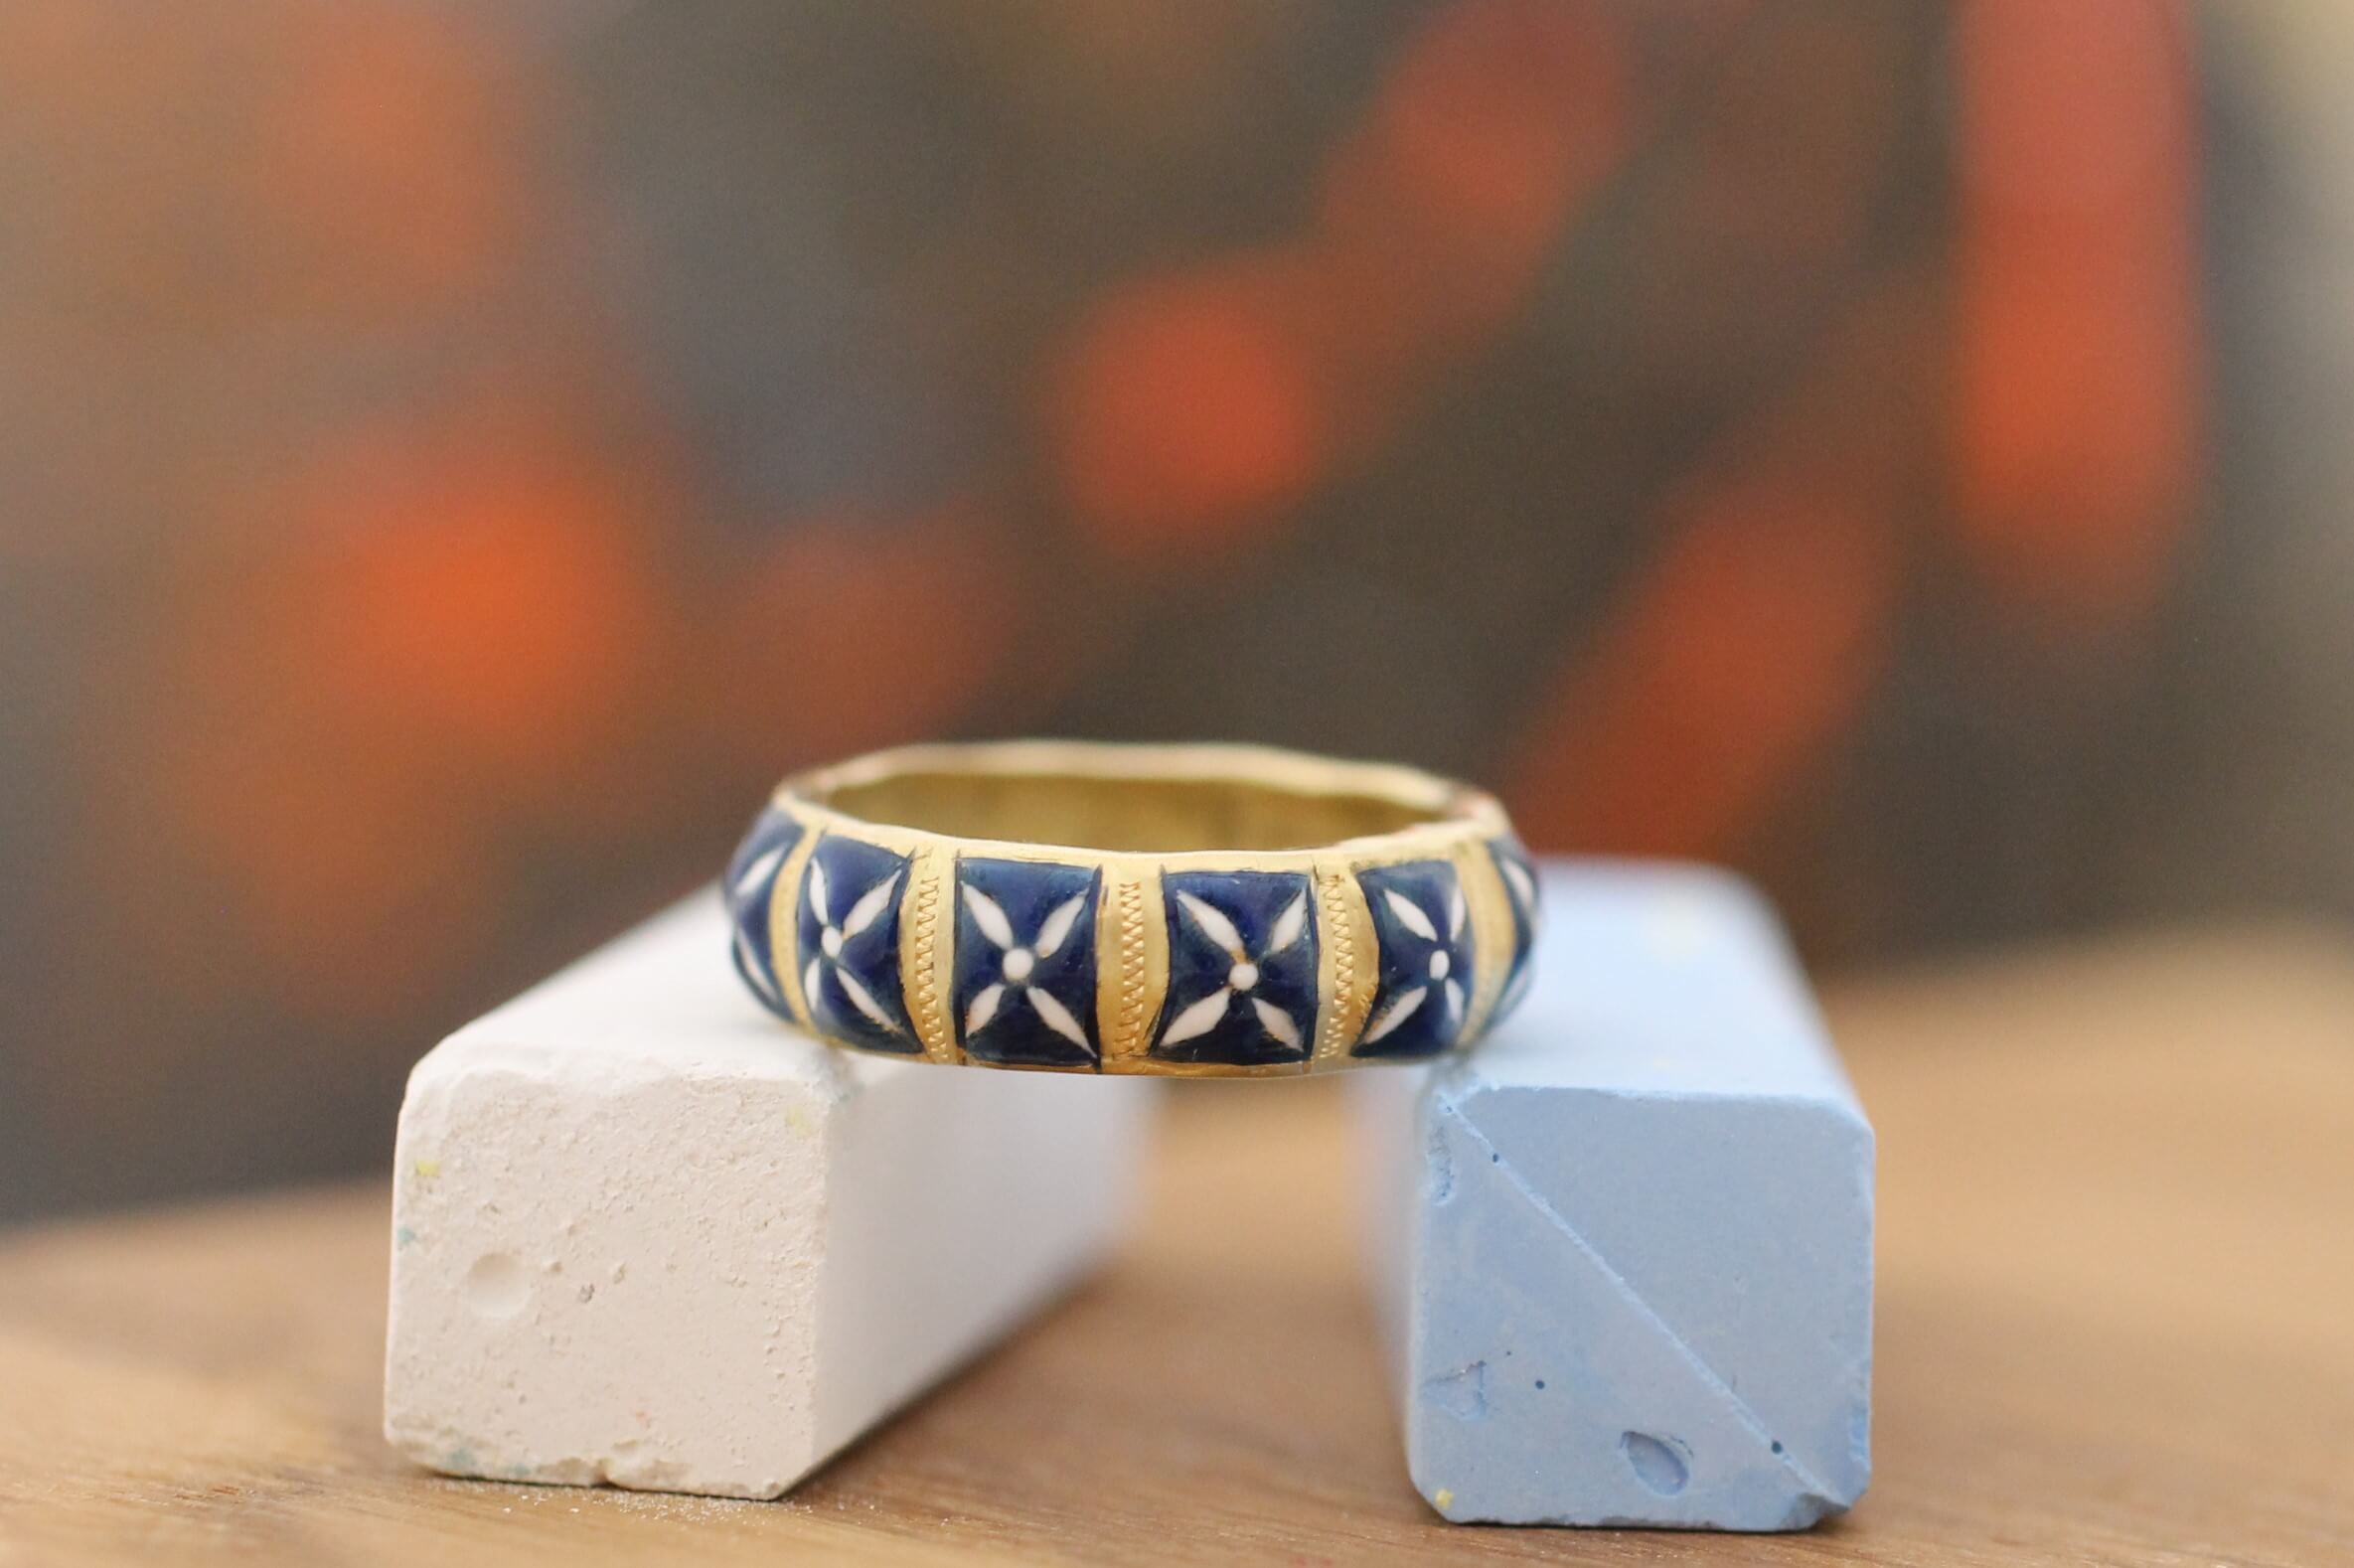 Gold and enamel ring